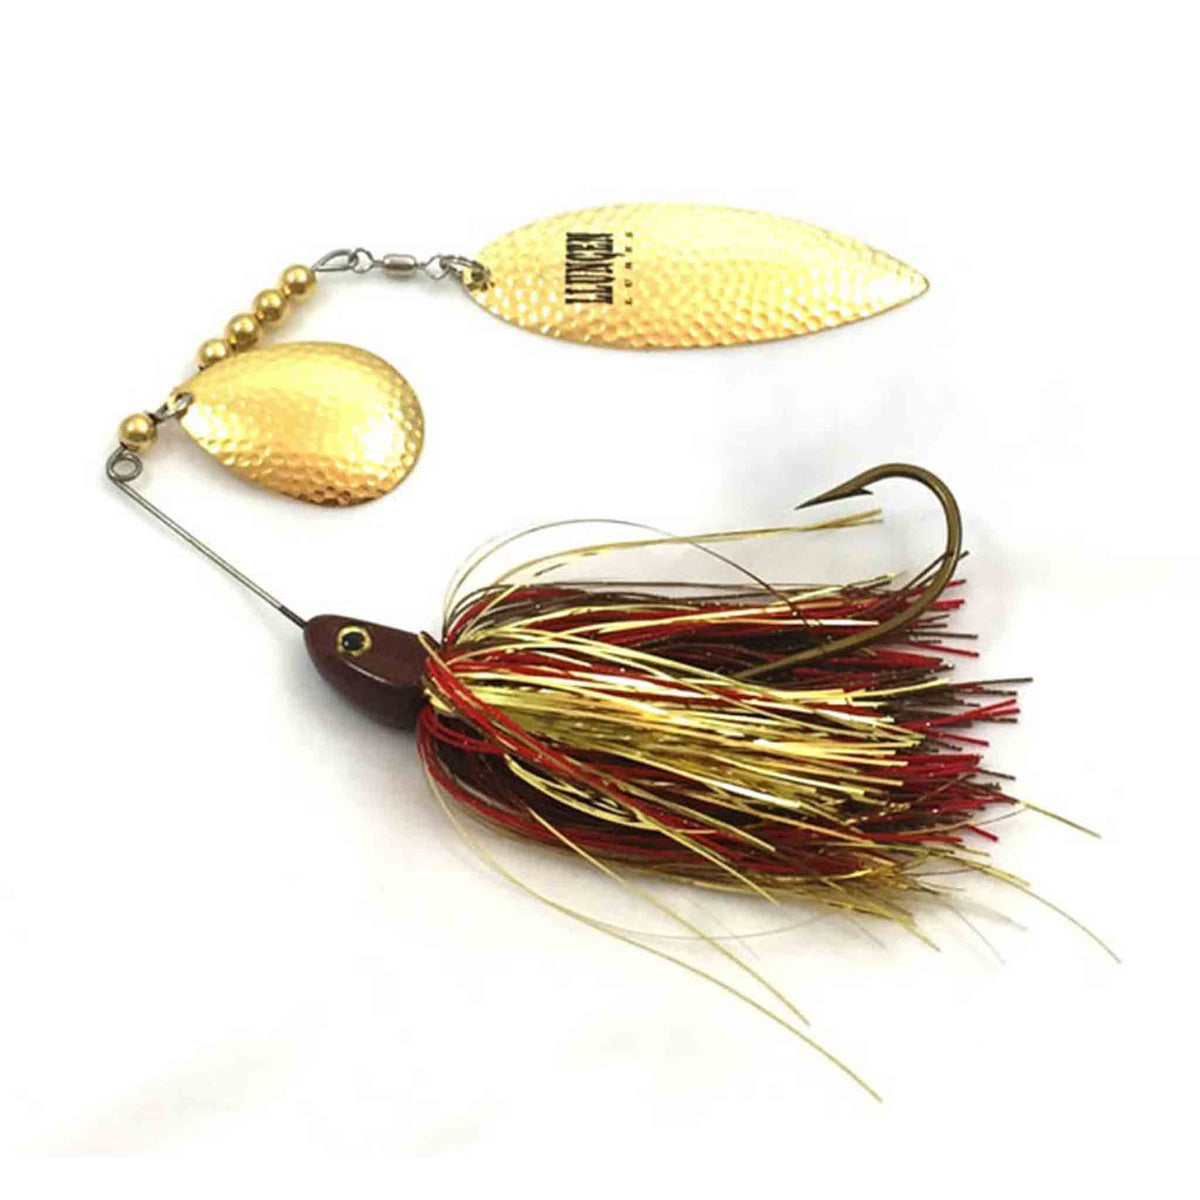 Llungen Lures Nutbuster Jr Hybrid Gold / Red Spinnerbaits